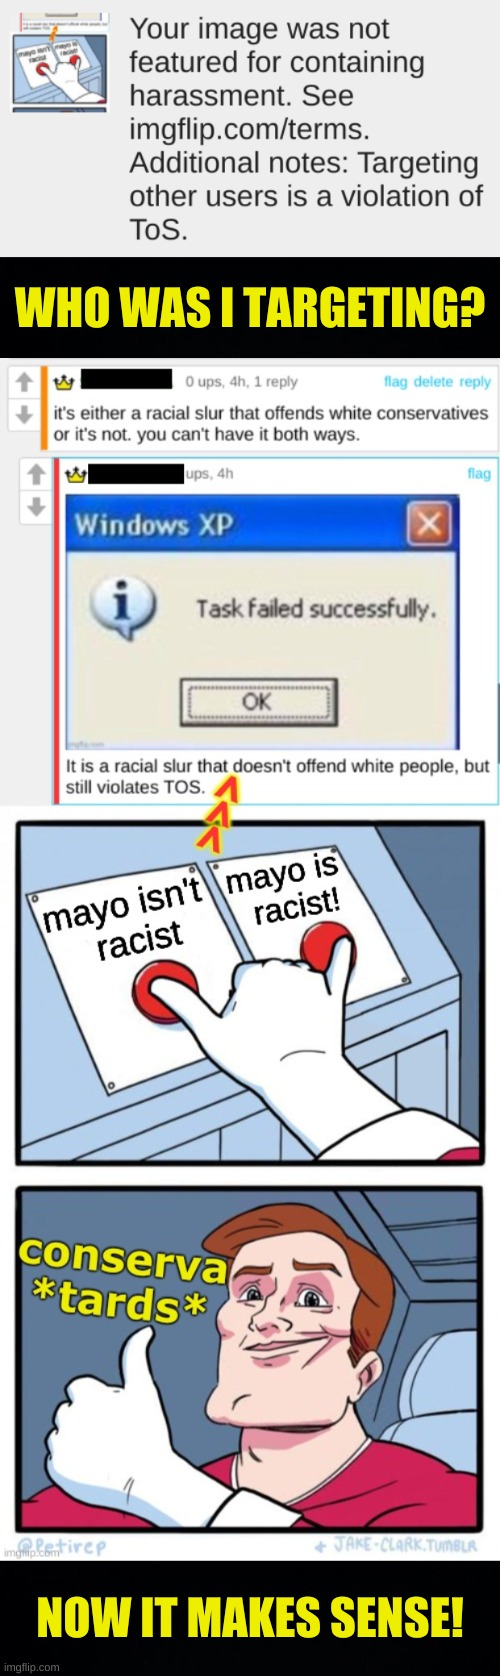 i thought that mayo wasn't a thing, that only libtards could be triggered? | WHO WAS I TARGETING? NOW IT MAKES SENSE! | image tagged in conservative hypocrisy,triggered conservatives,mayo,white privilege,racial slurs,offended | made w/ Imgflip meme maker